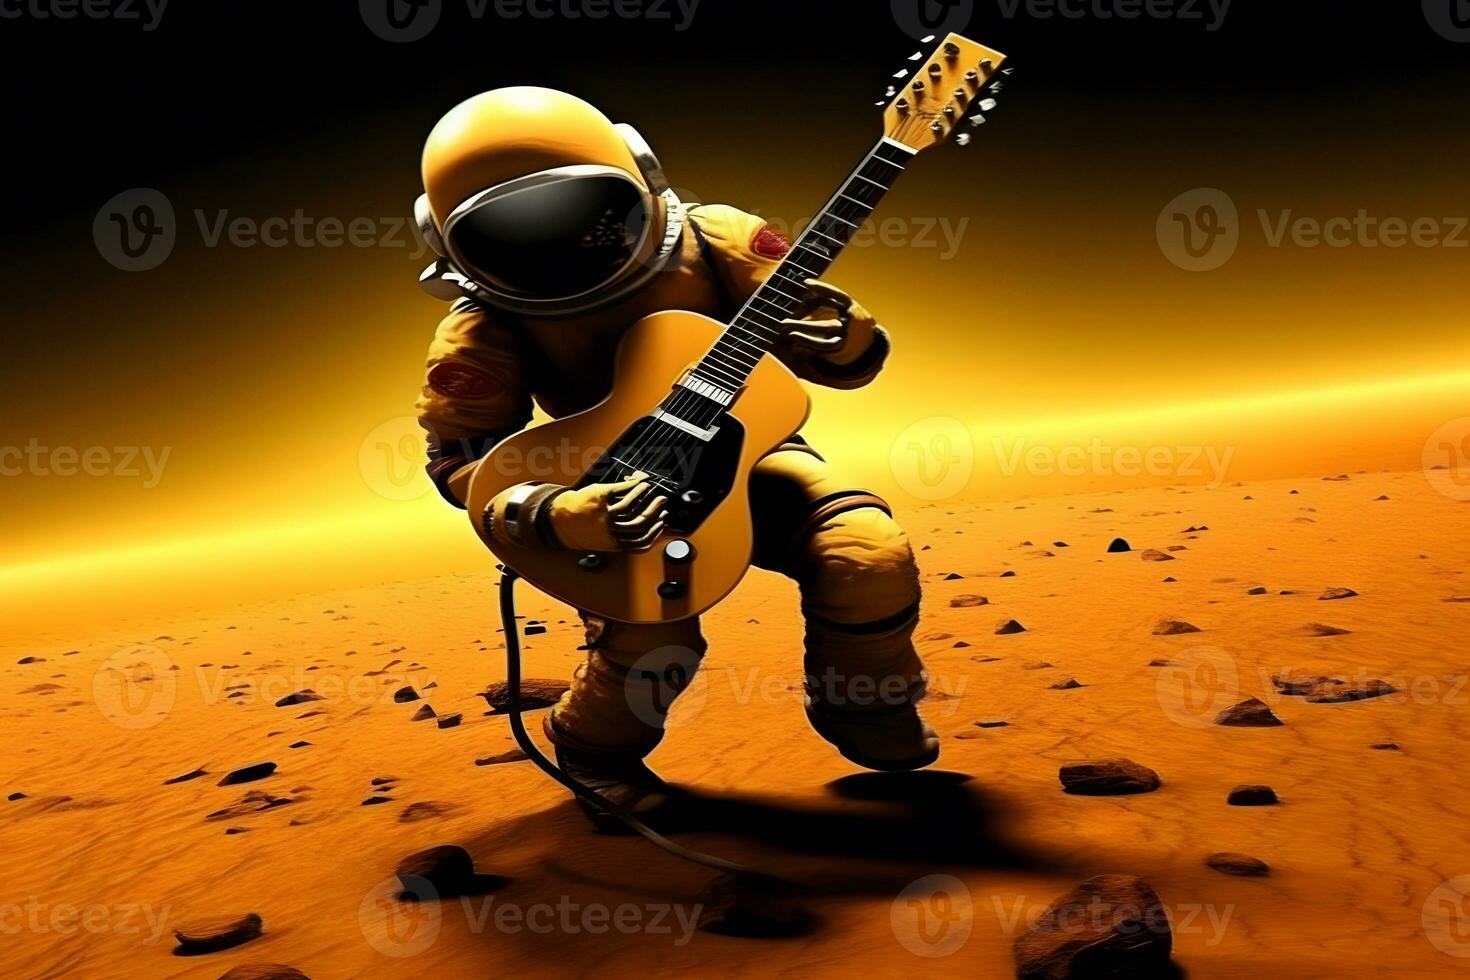 Astronaut space rock guitar. Neural network AI generated photo